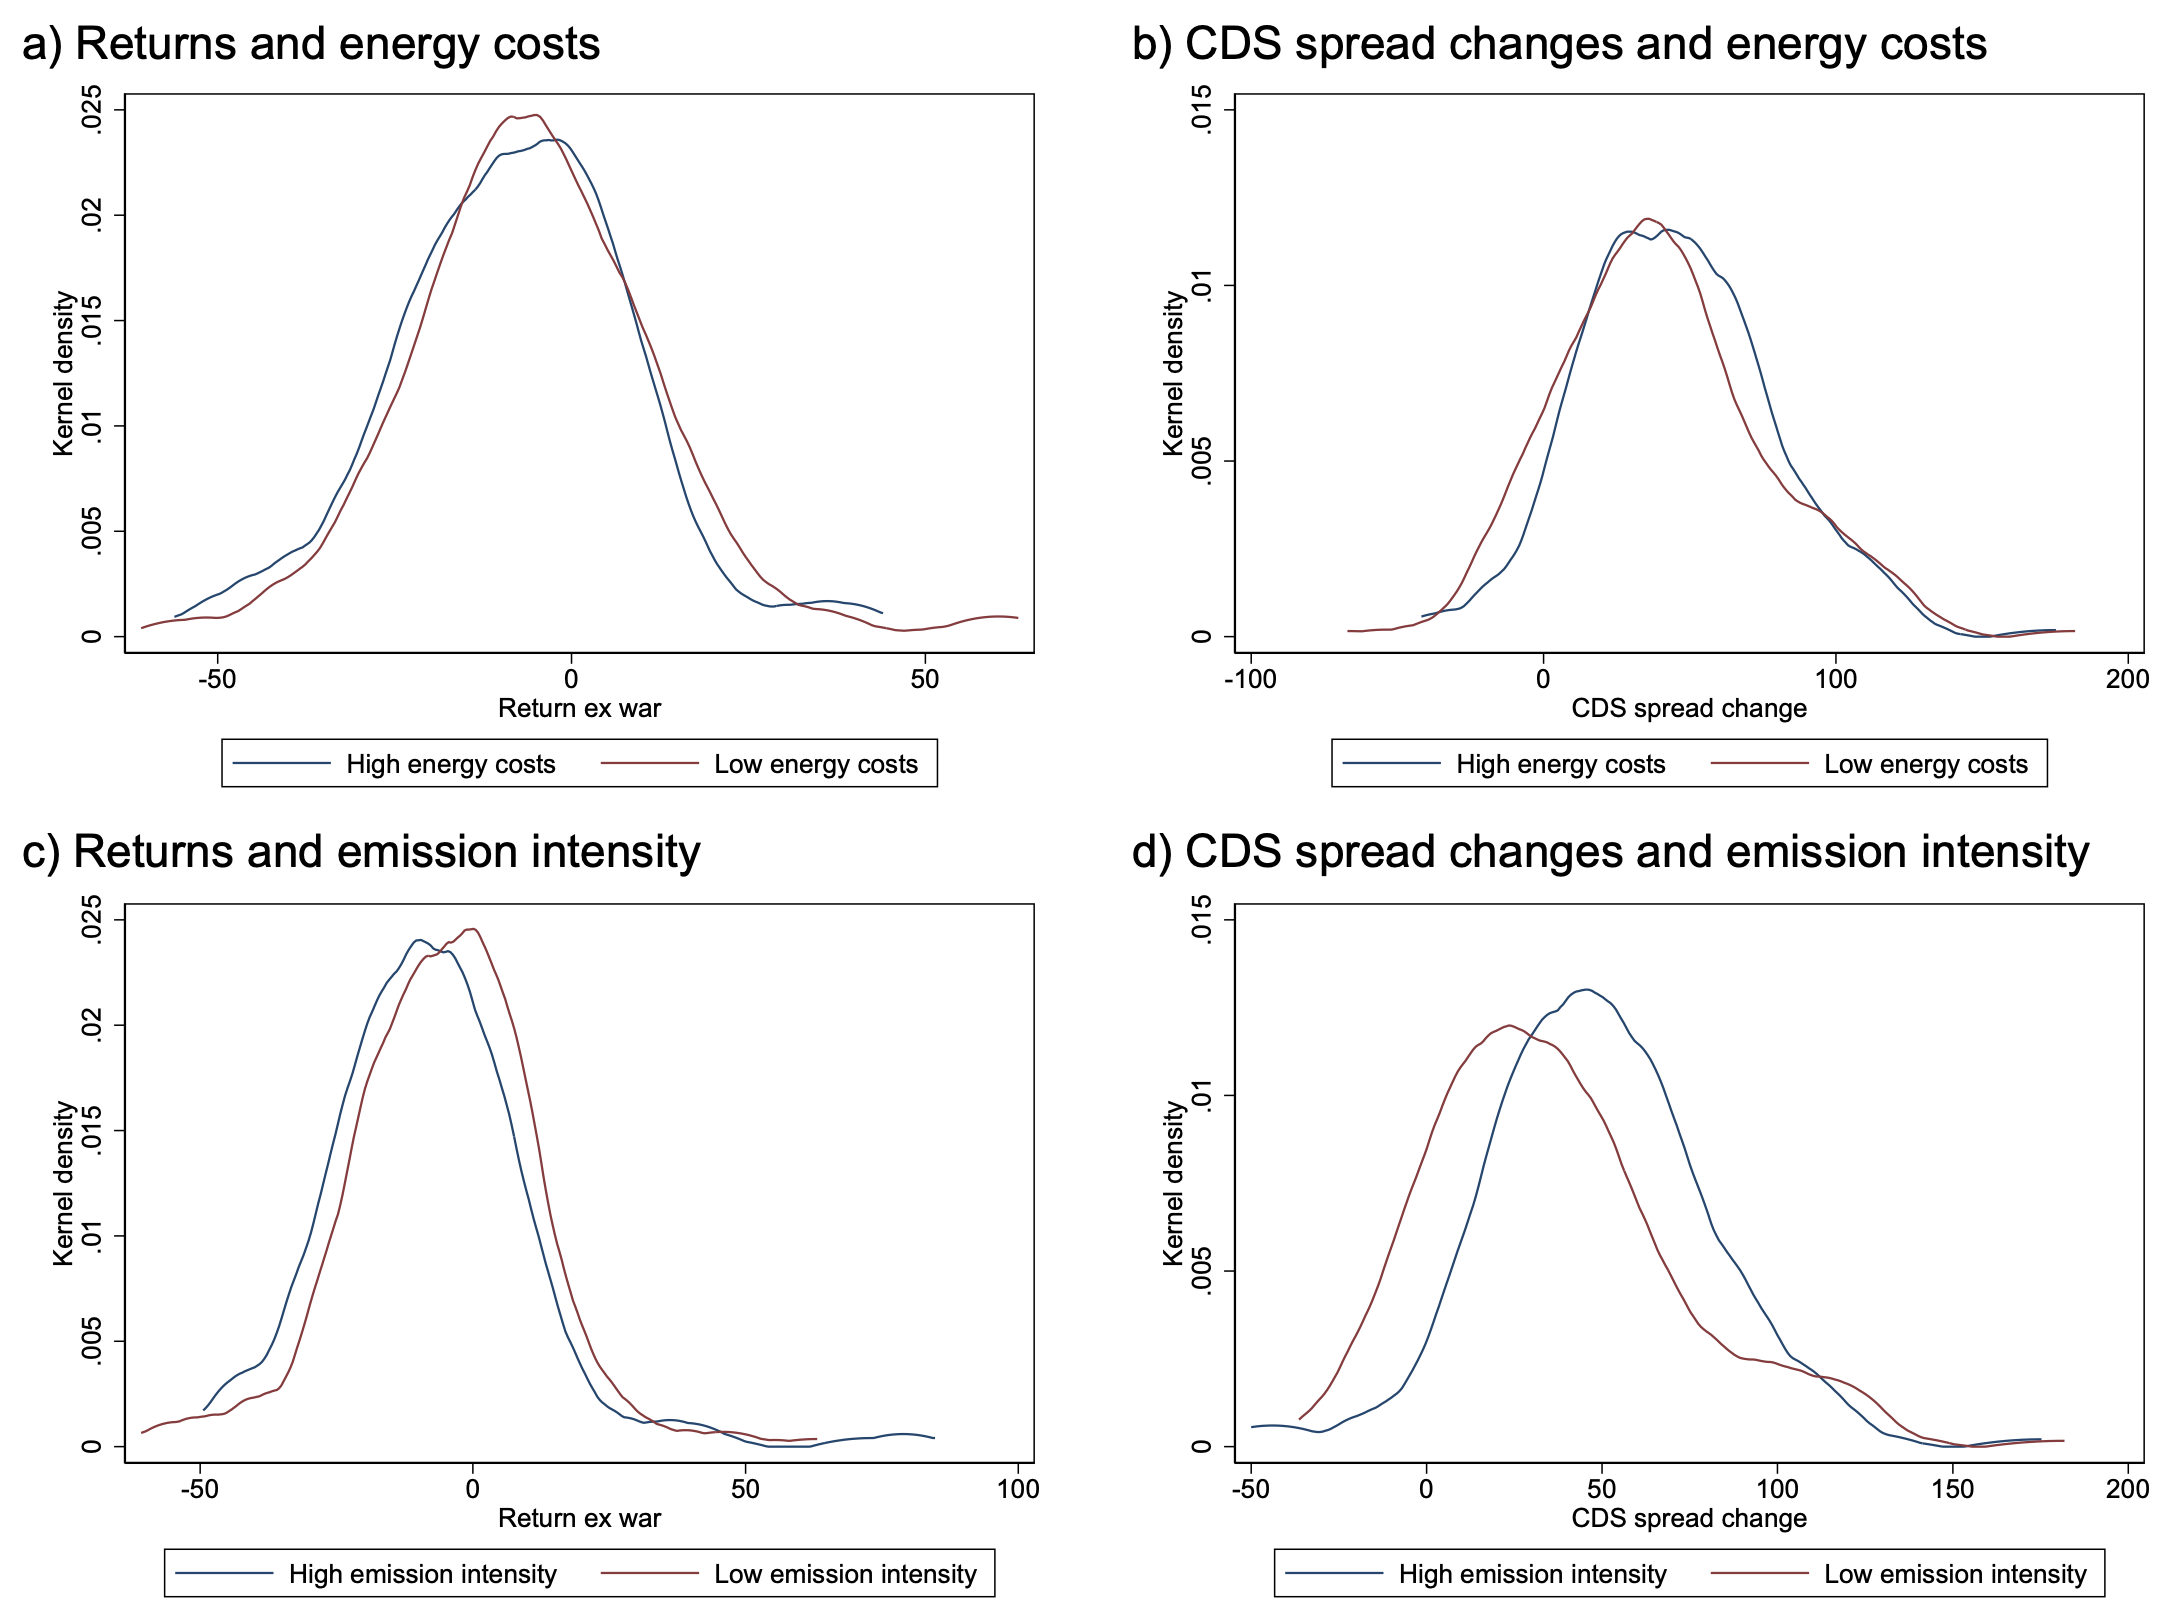 Figure 1 Sensitivity to the energy shock and firms’ financial performance